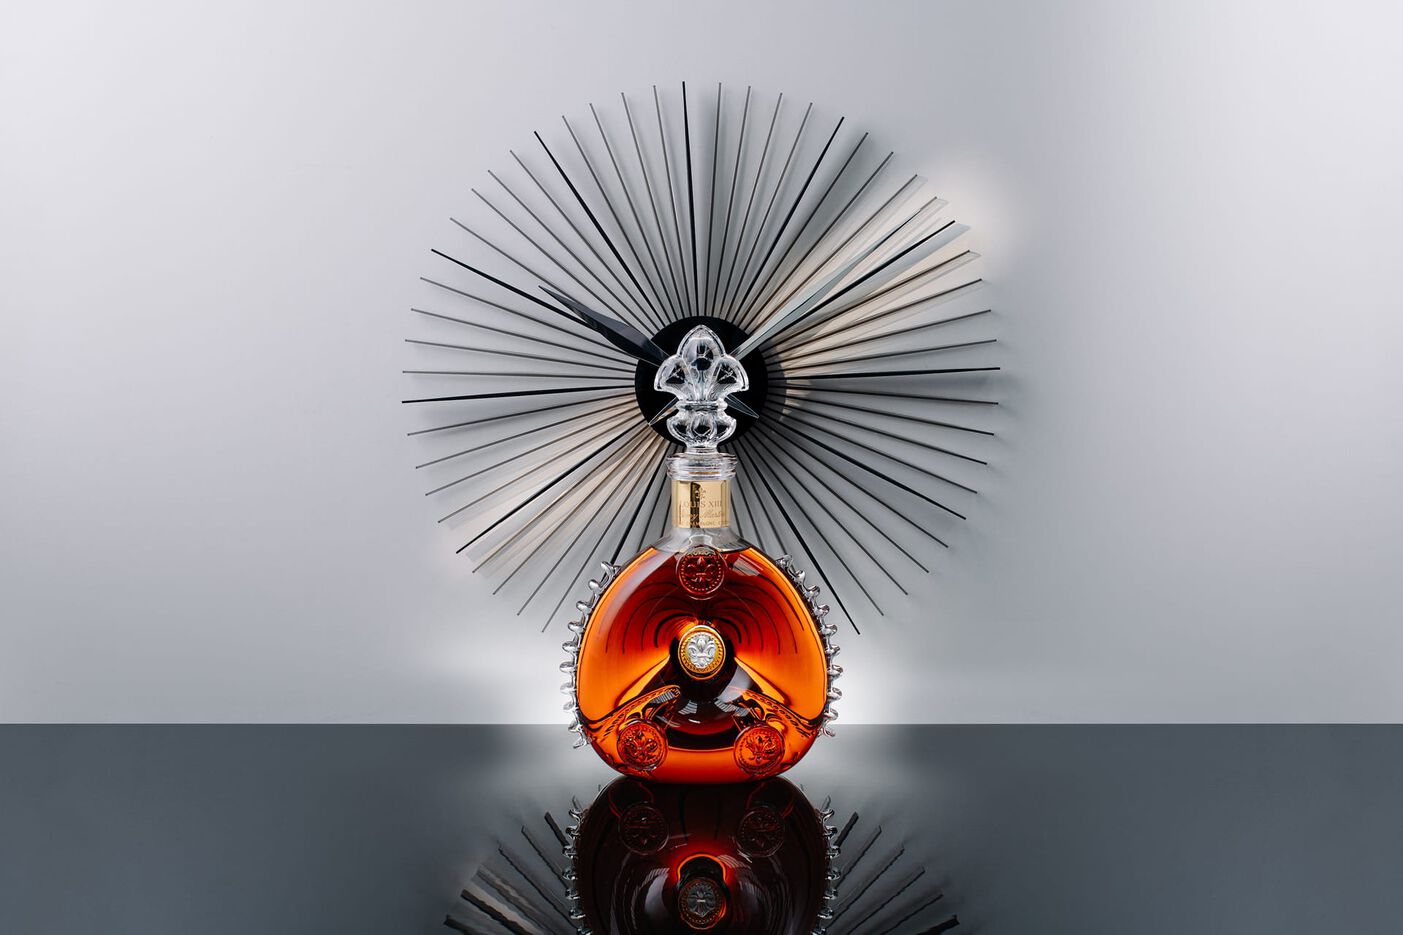 A lifestyle photo of LOUIS XIII decanter on a black shiny surface, a black modern clock behind